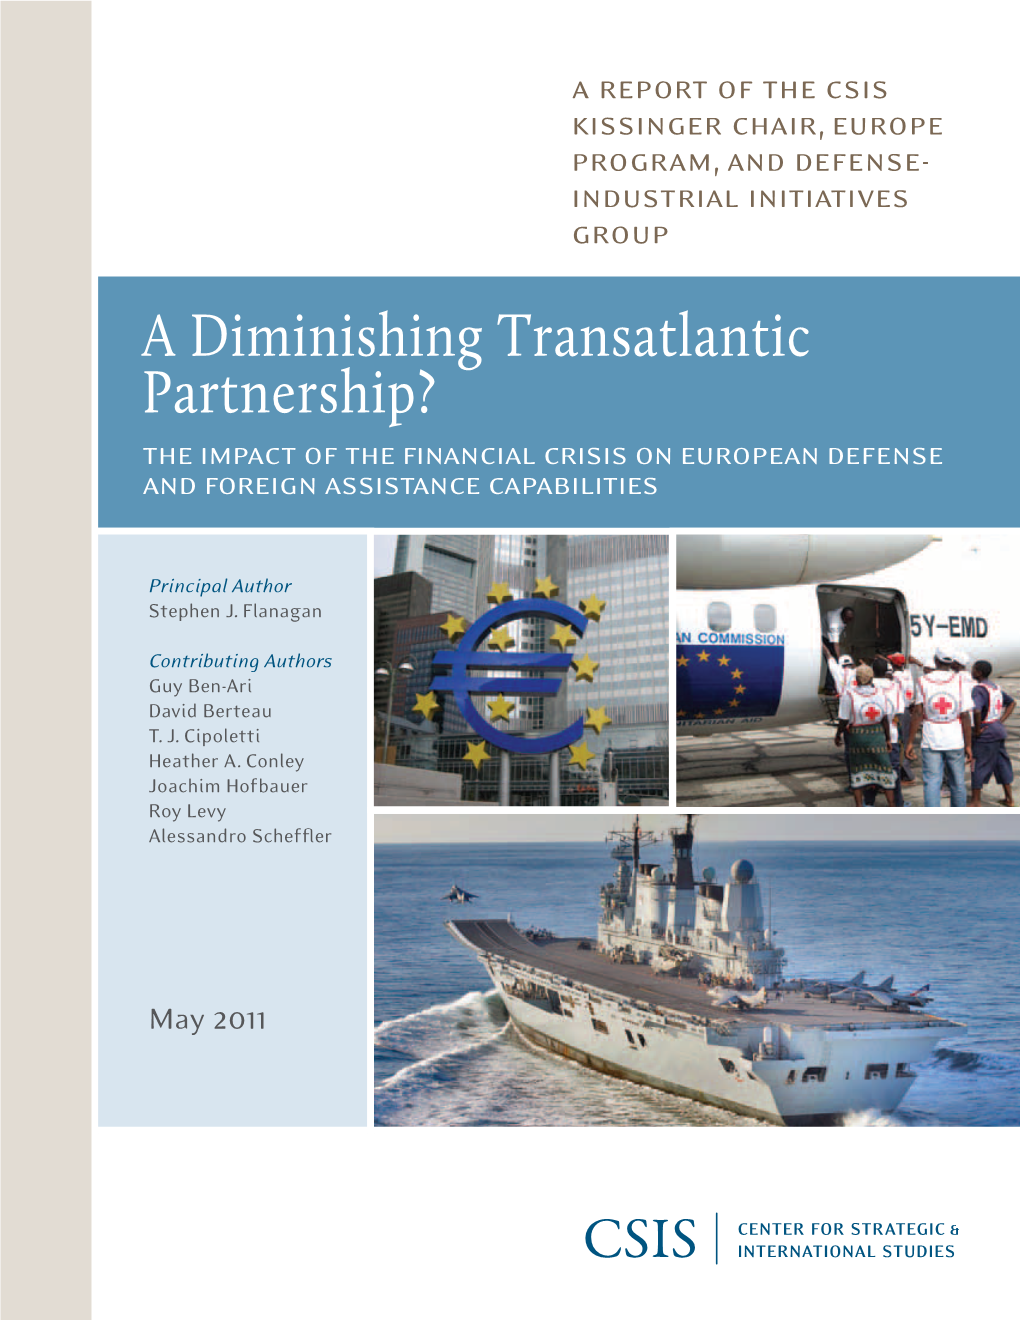 The Impact of the Financial Crisis on European Defense and Foreign Assistance Capabilities